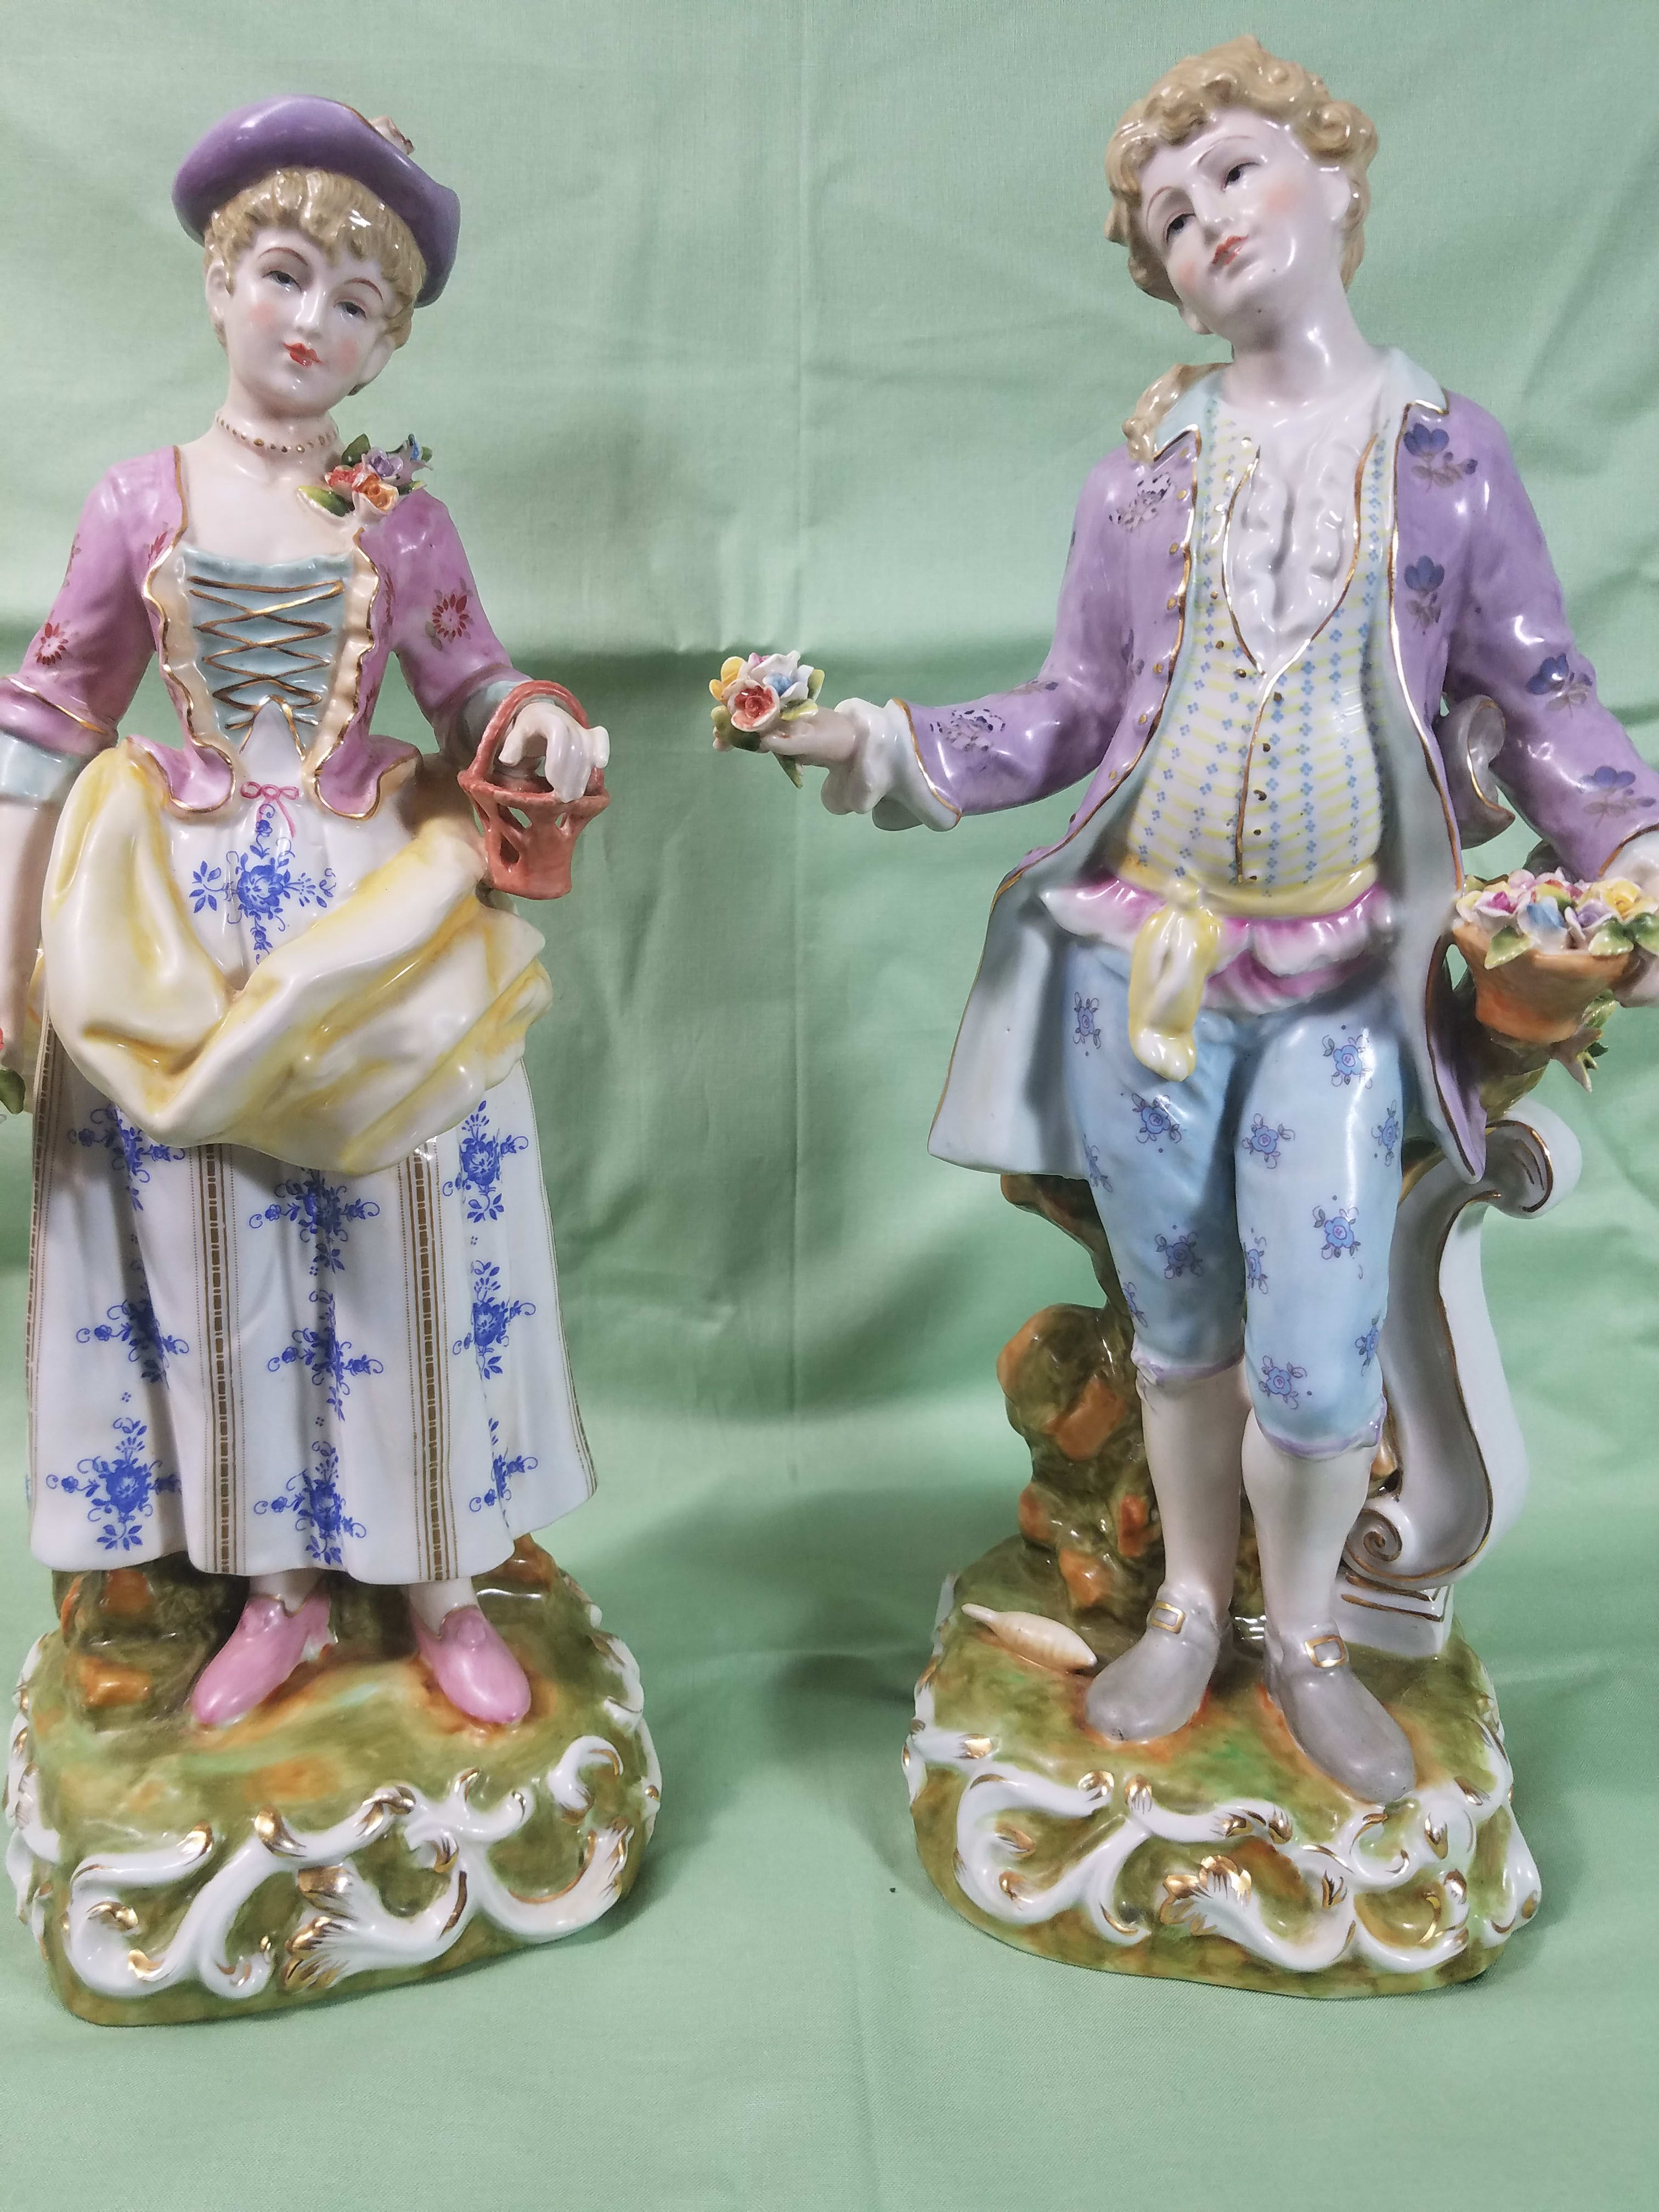     ANTIQUE  PORCELAIN  FIGURINES   NEW-G88 - This pair of fine quality ANTIQUE PORCELAIN FIGURINES were made by Volkstedt / Greiner and Holzapfel  of Volkstedt, Thuringia, Germany from 1804 - 1815   This exceptional pair of figurines are of the highest quality and has no chips or cracks and is in excellent condition.. They stand an impressive 14 inches tall and are a true antiques collectors dream.. The fourth pic. shows the bottom and the mark of the maker Volkstedt/Greiner and Holzapfel.  More  and better pictures showing greater detail will be added here soon.. For more information or questions about shipment here in the U.S.A.  please phone us at 1-800-331-5358